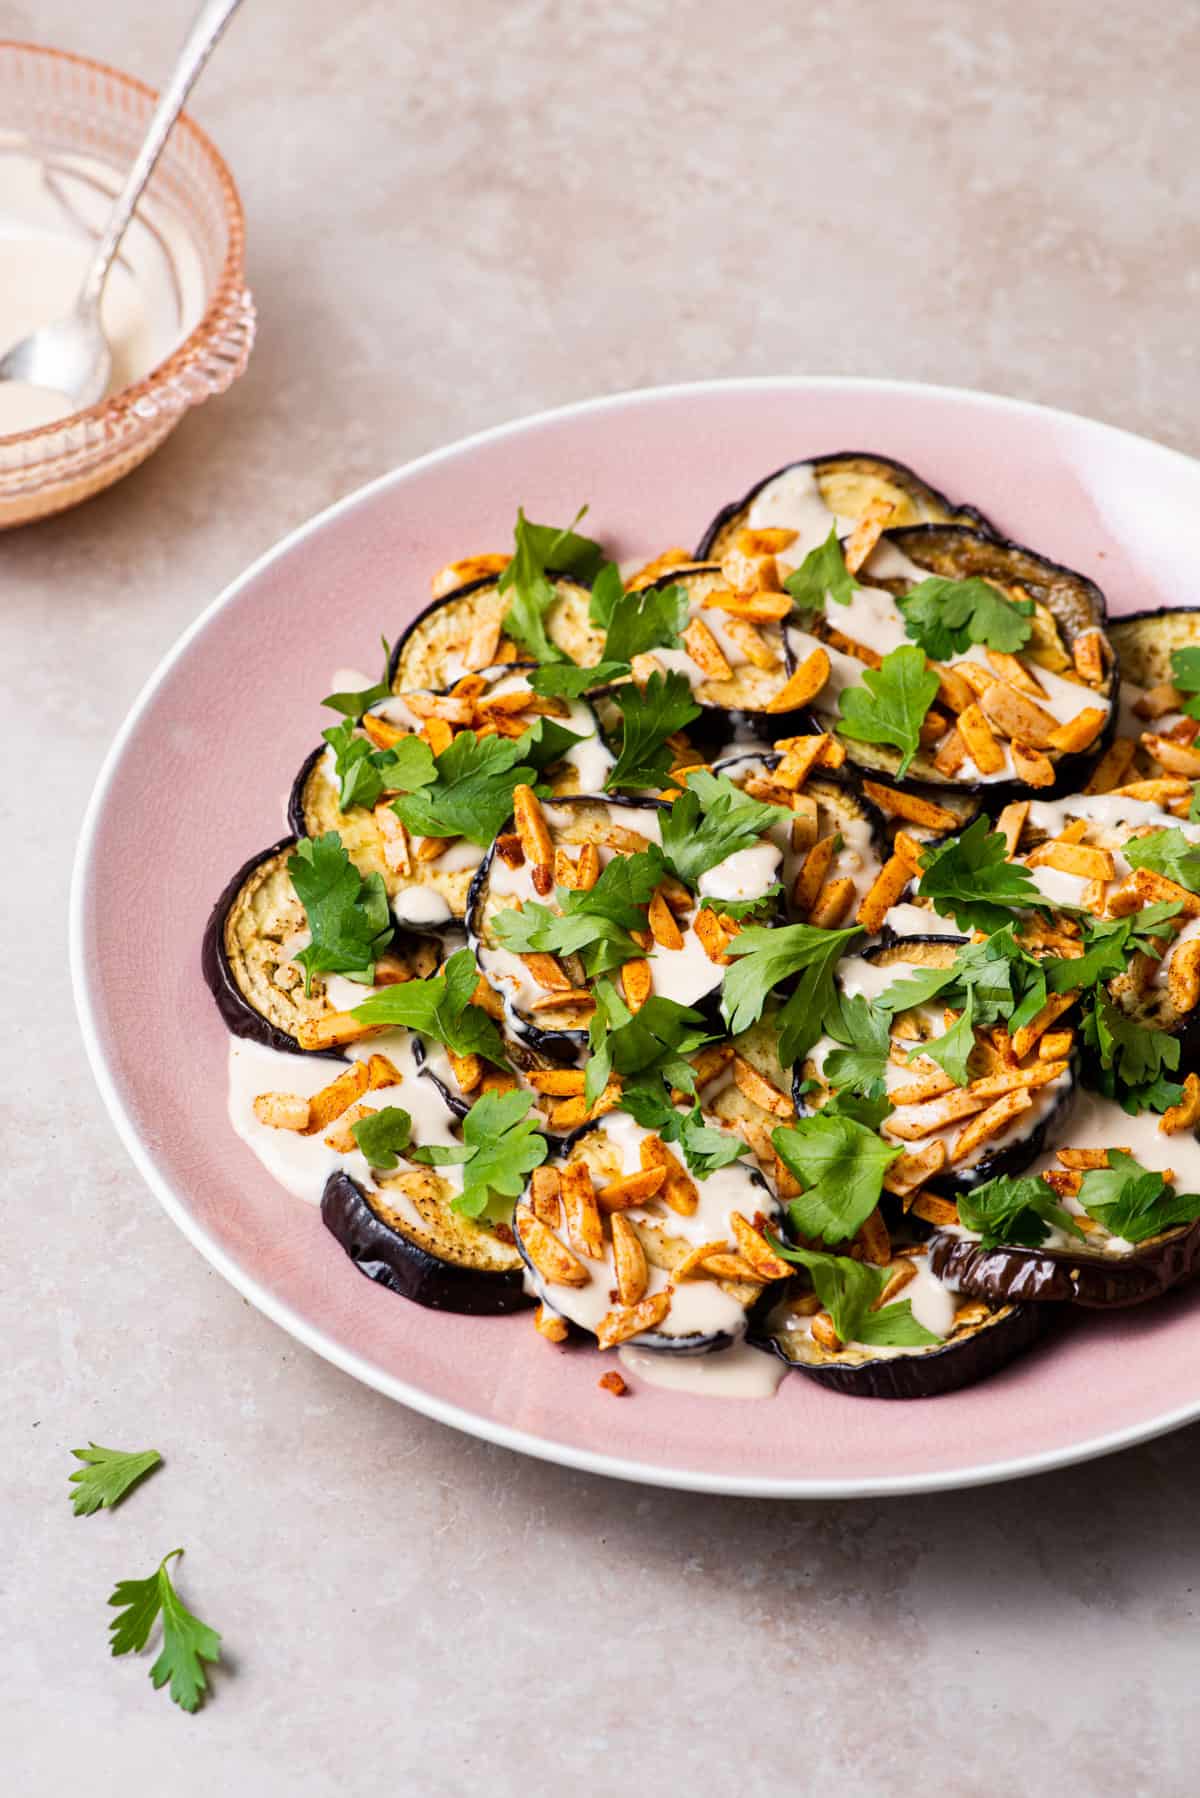 Ottolenghi inspired roasted eggplant rounds on a pink platter, drizzled with tahini sauce and topped with spiced almonds and parsley.